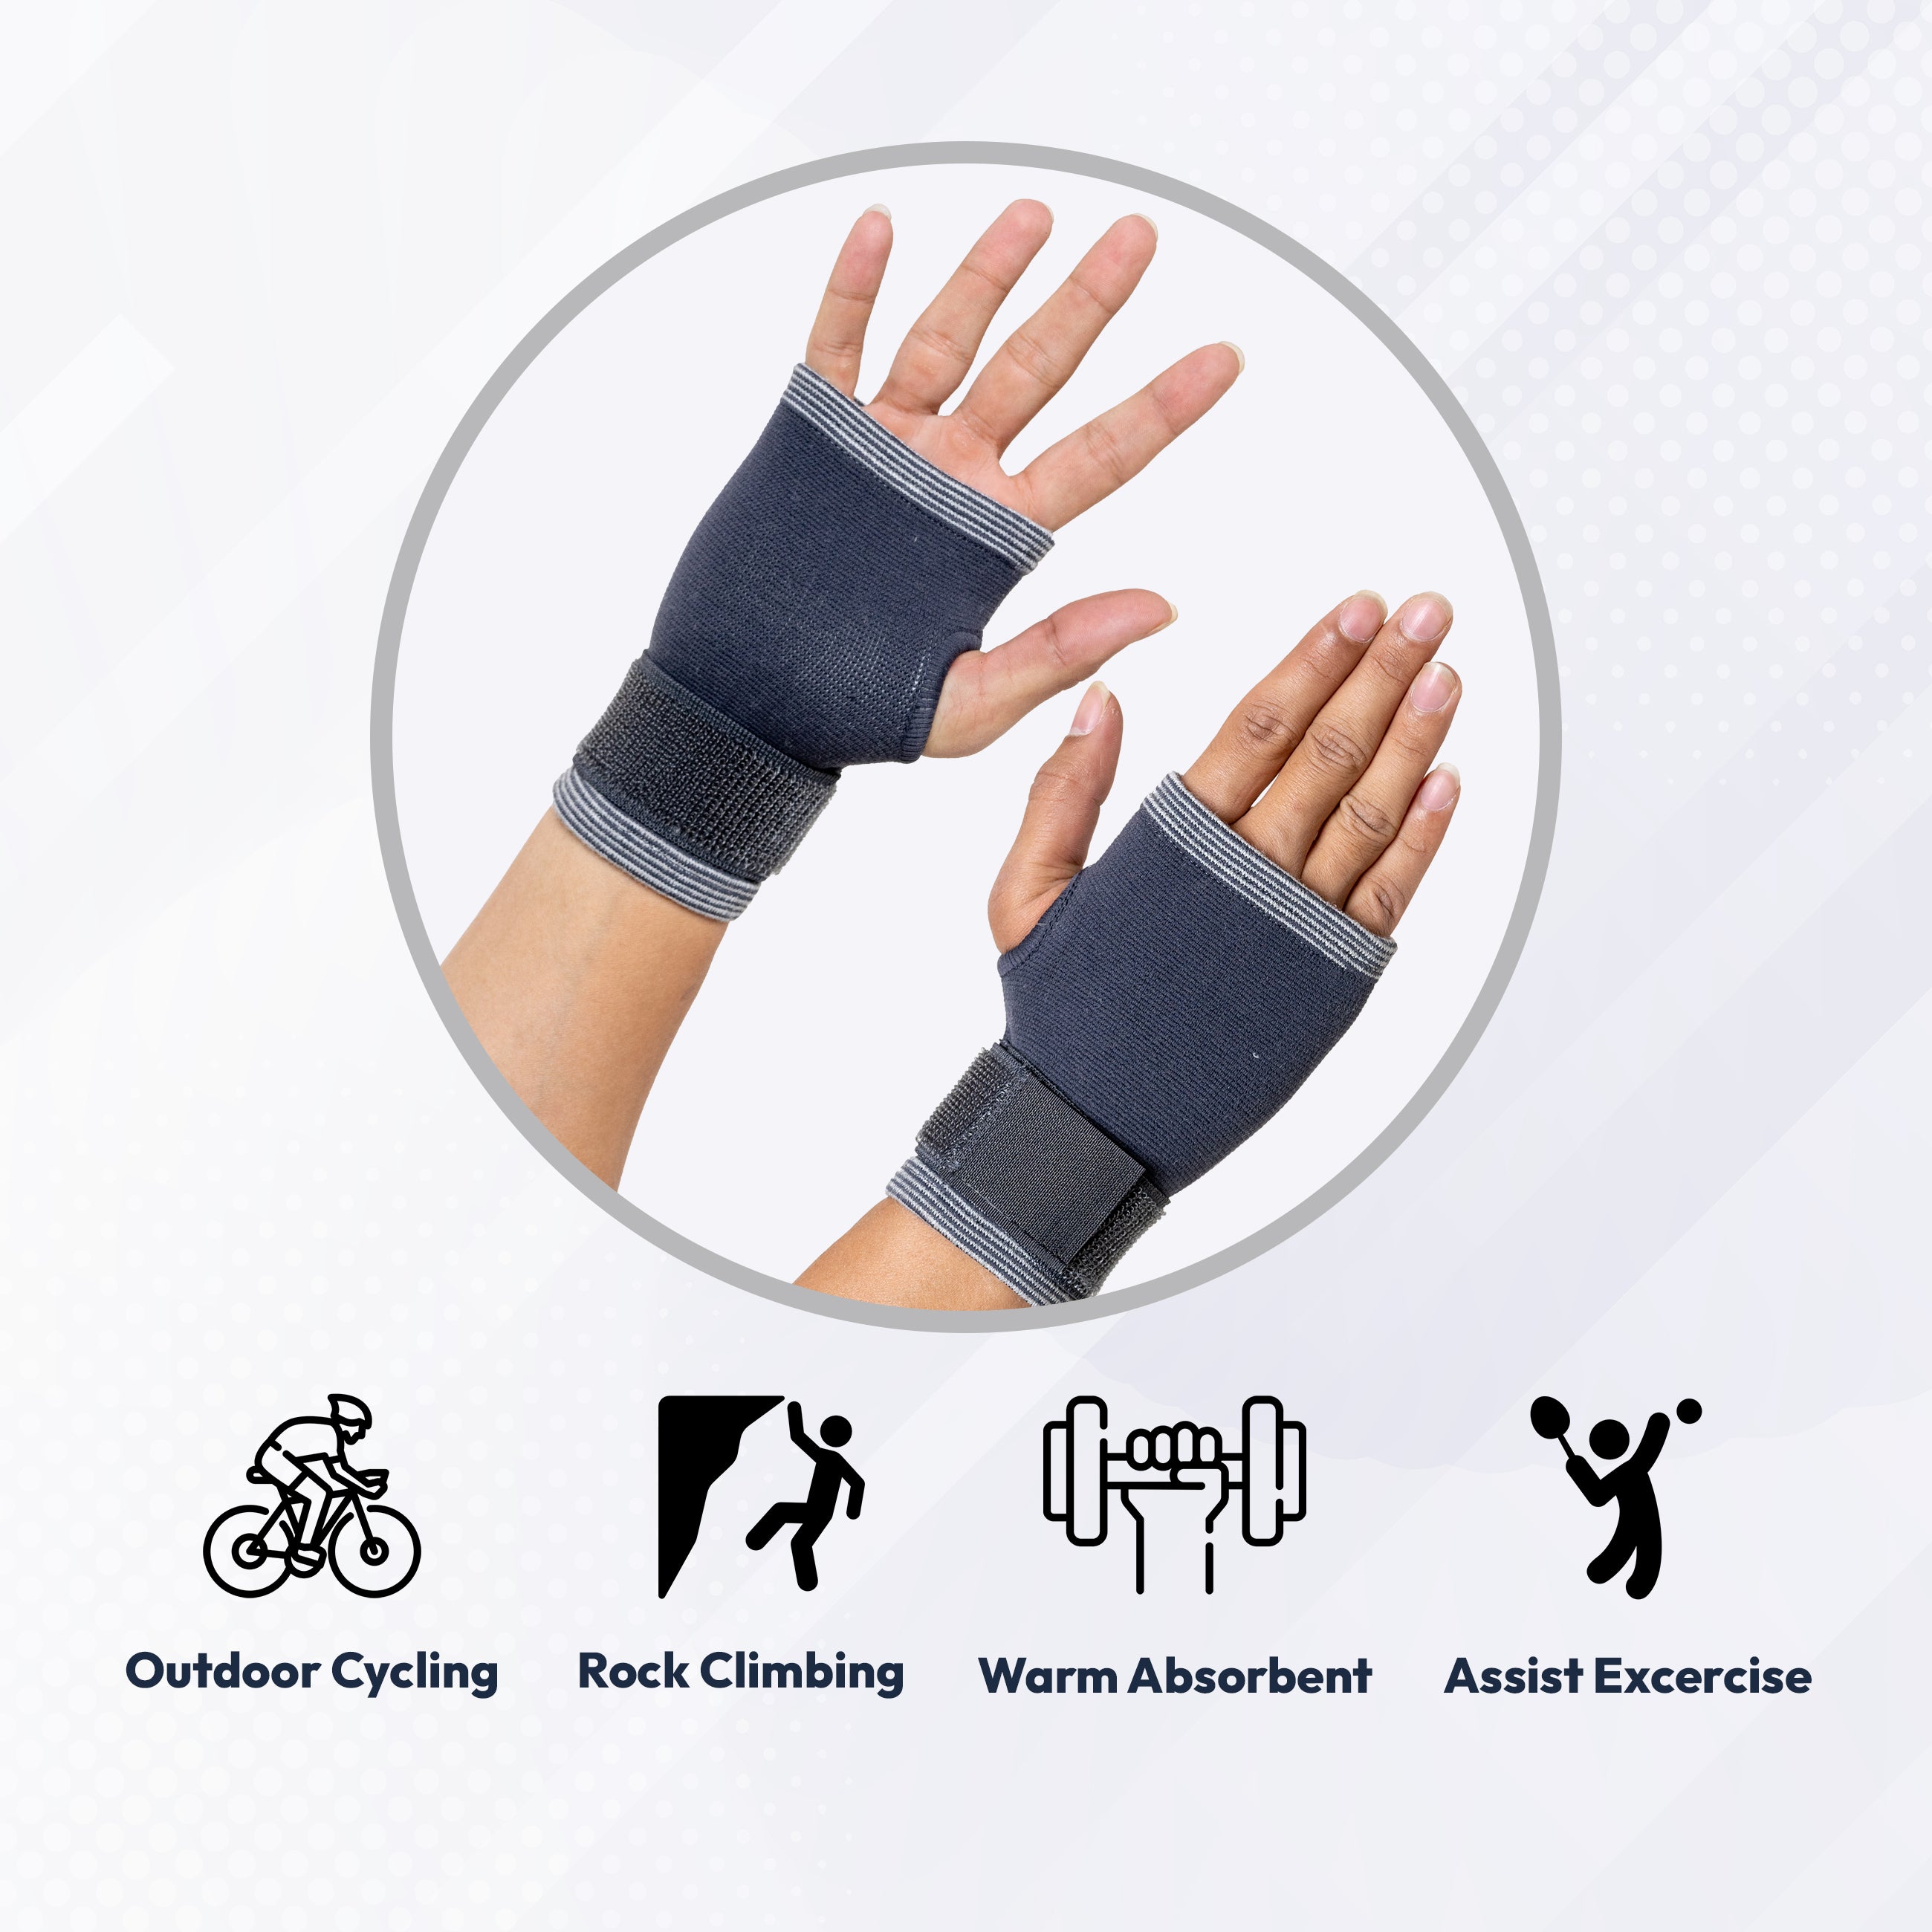 I5Joints– Elastotech wrist/Palm Sleeve(Relief Carpal Tunnel Wrist Brace with Adjustable Straps )